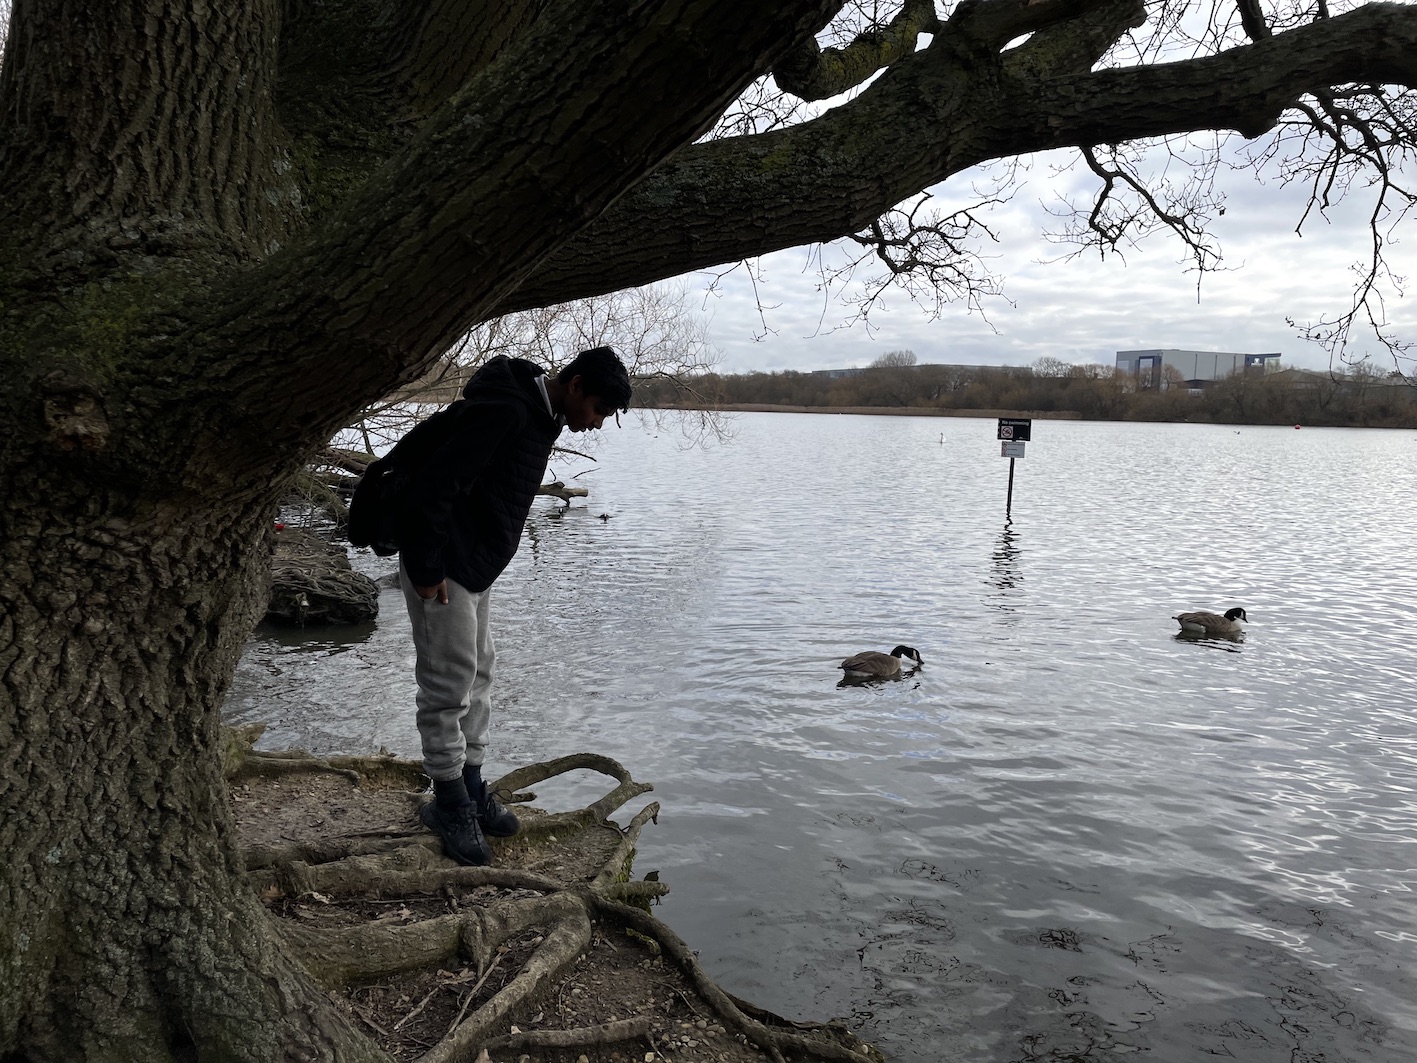 A student stands on the edge of a lake, leaning over and looking down into its depths, with a tree behind them mirroring their movement